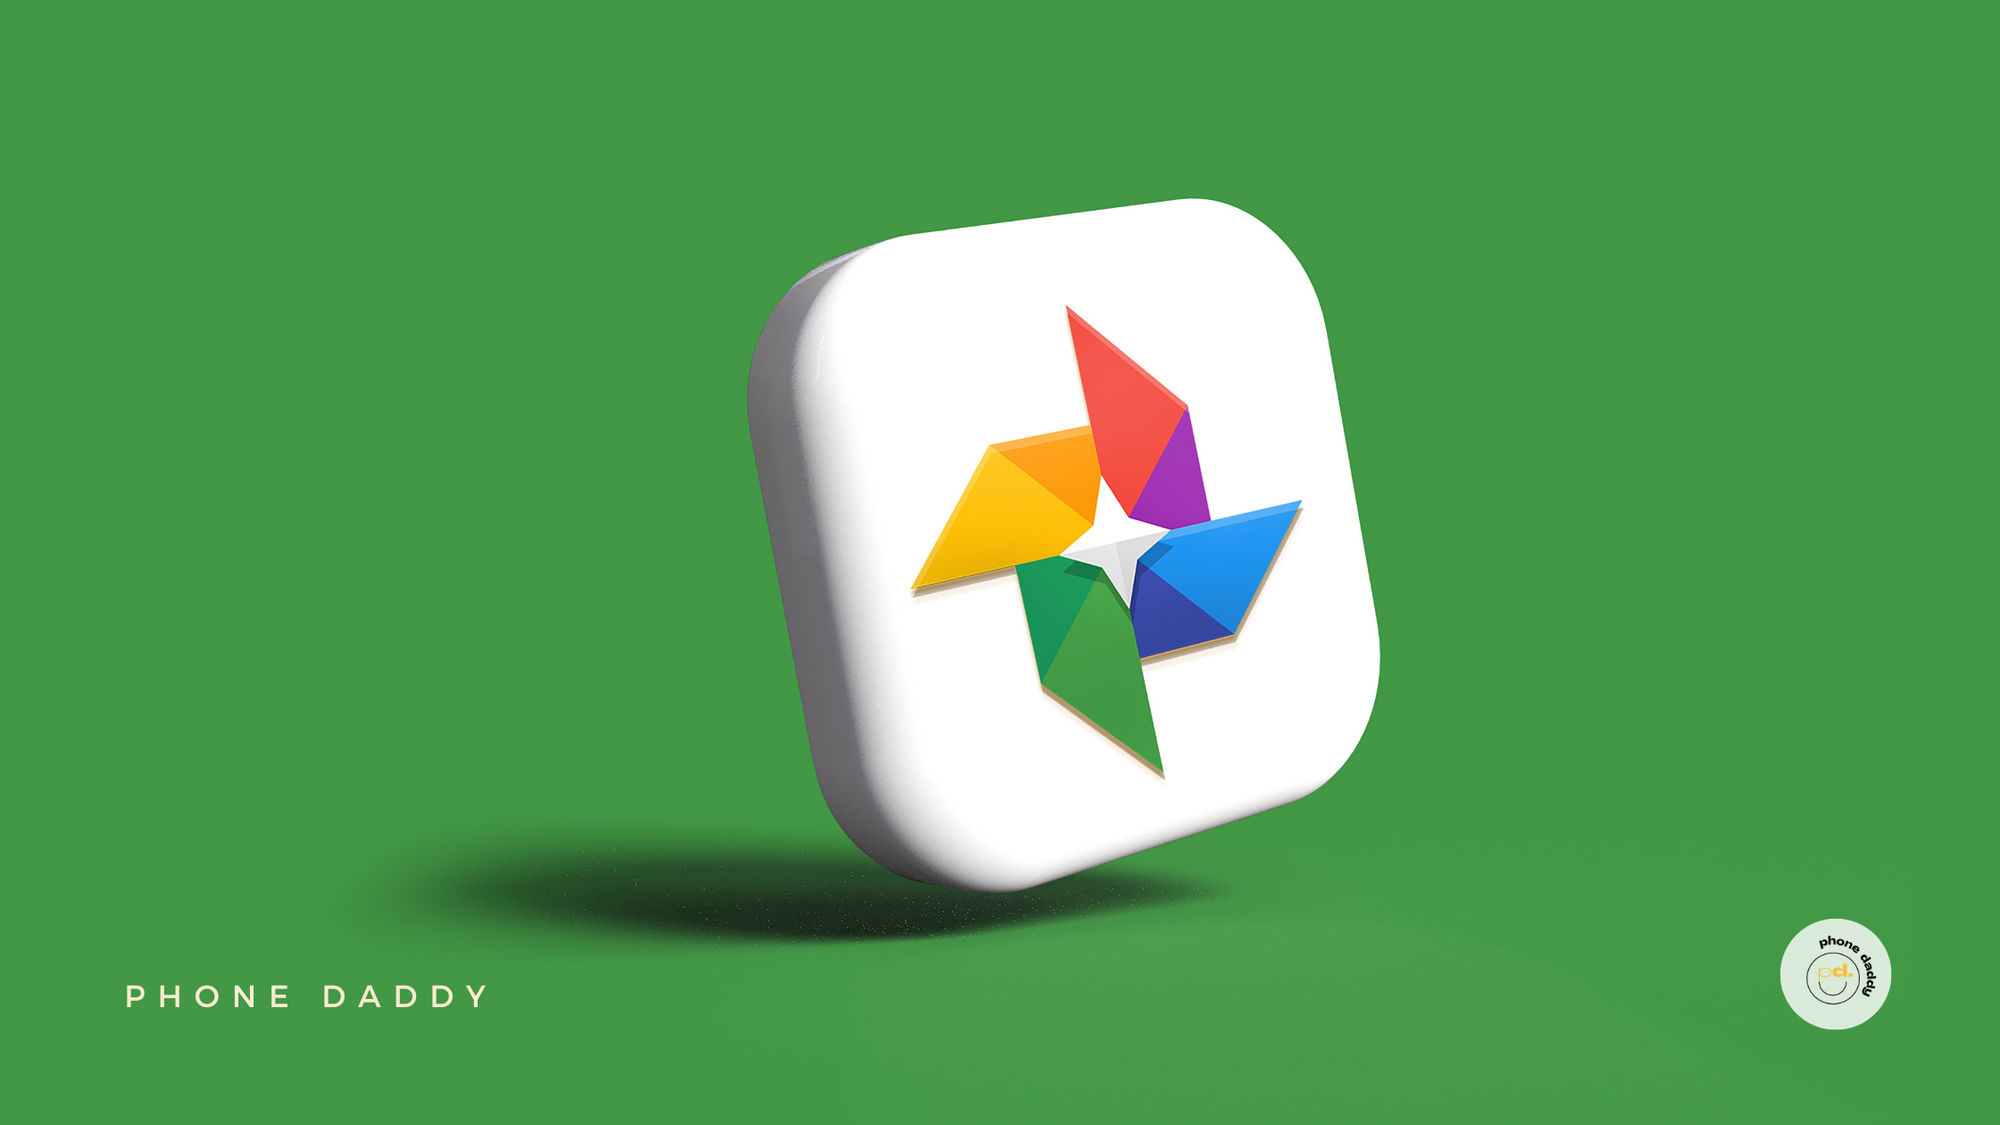 GOOGLE PHOTOS ELIMINATING UNLIMITED STORAGE IN 2021